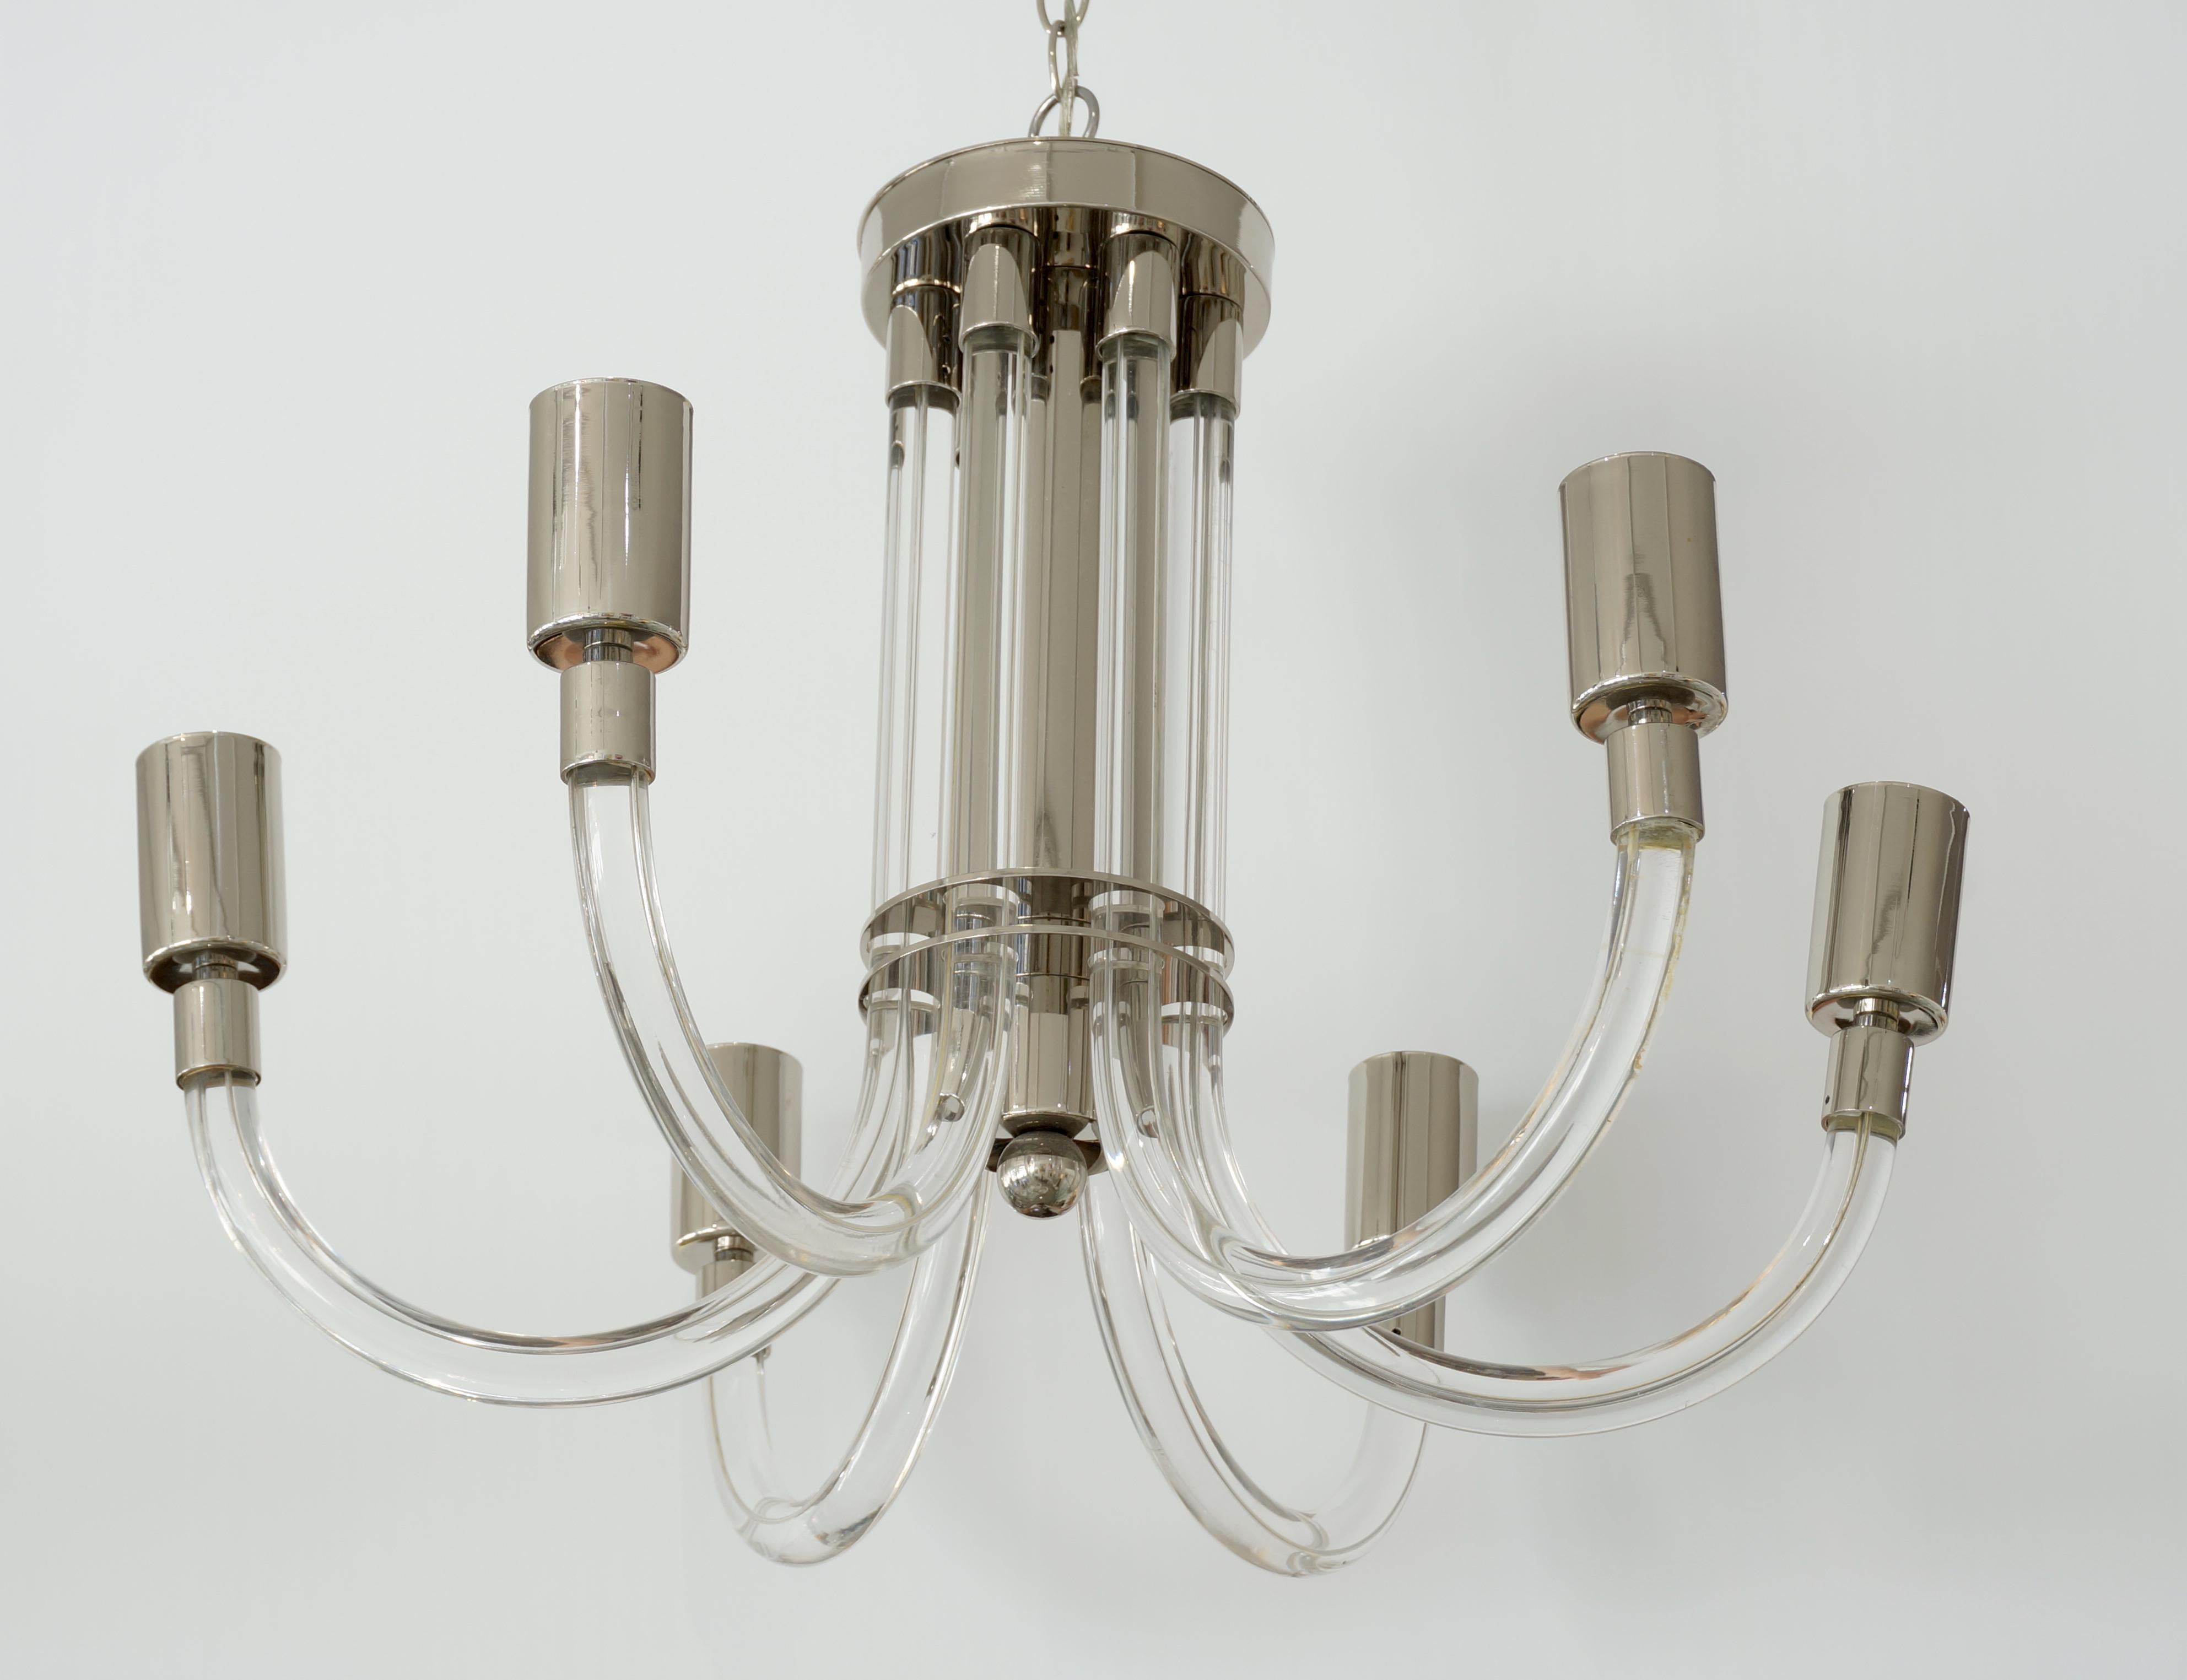 This stylish lucite and chrome chandelier dates to the 1970s and was designed by Charles Hollis Jones. 

Note: The mirror/top light bulbs shown in the photos are not included with the chandelier purchase.

Note: Requires six Edison based light